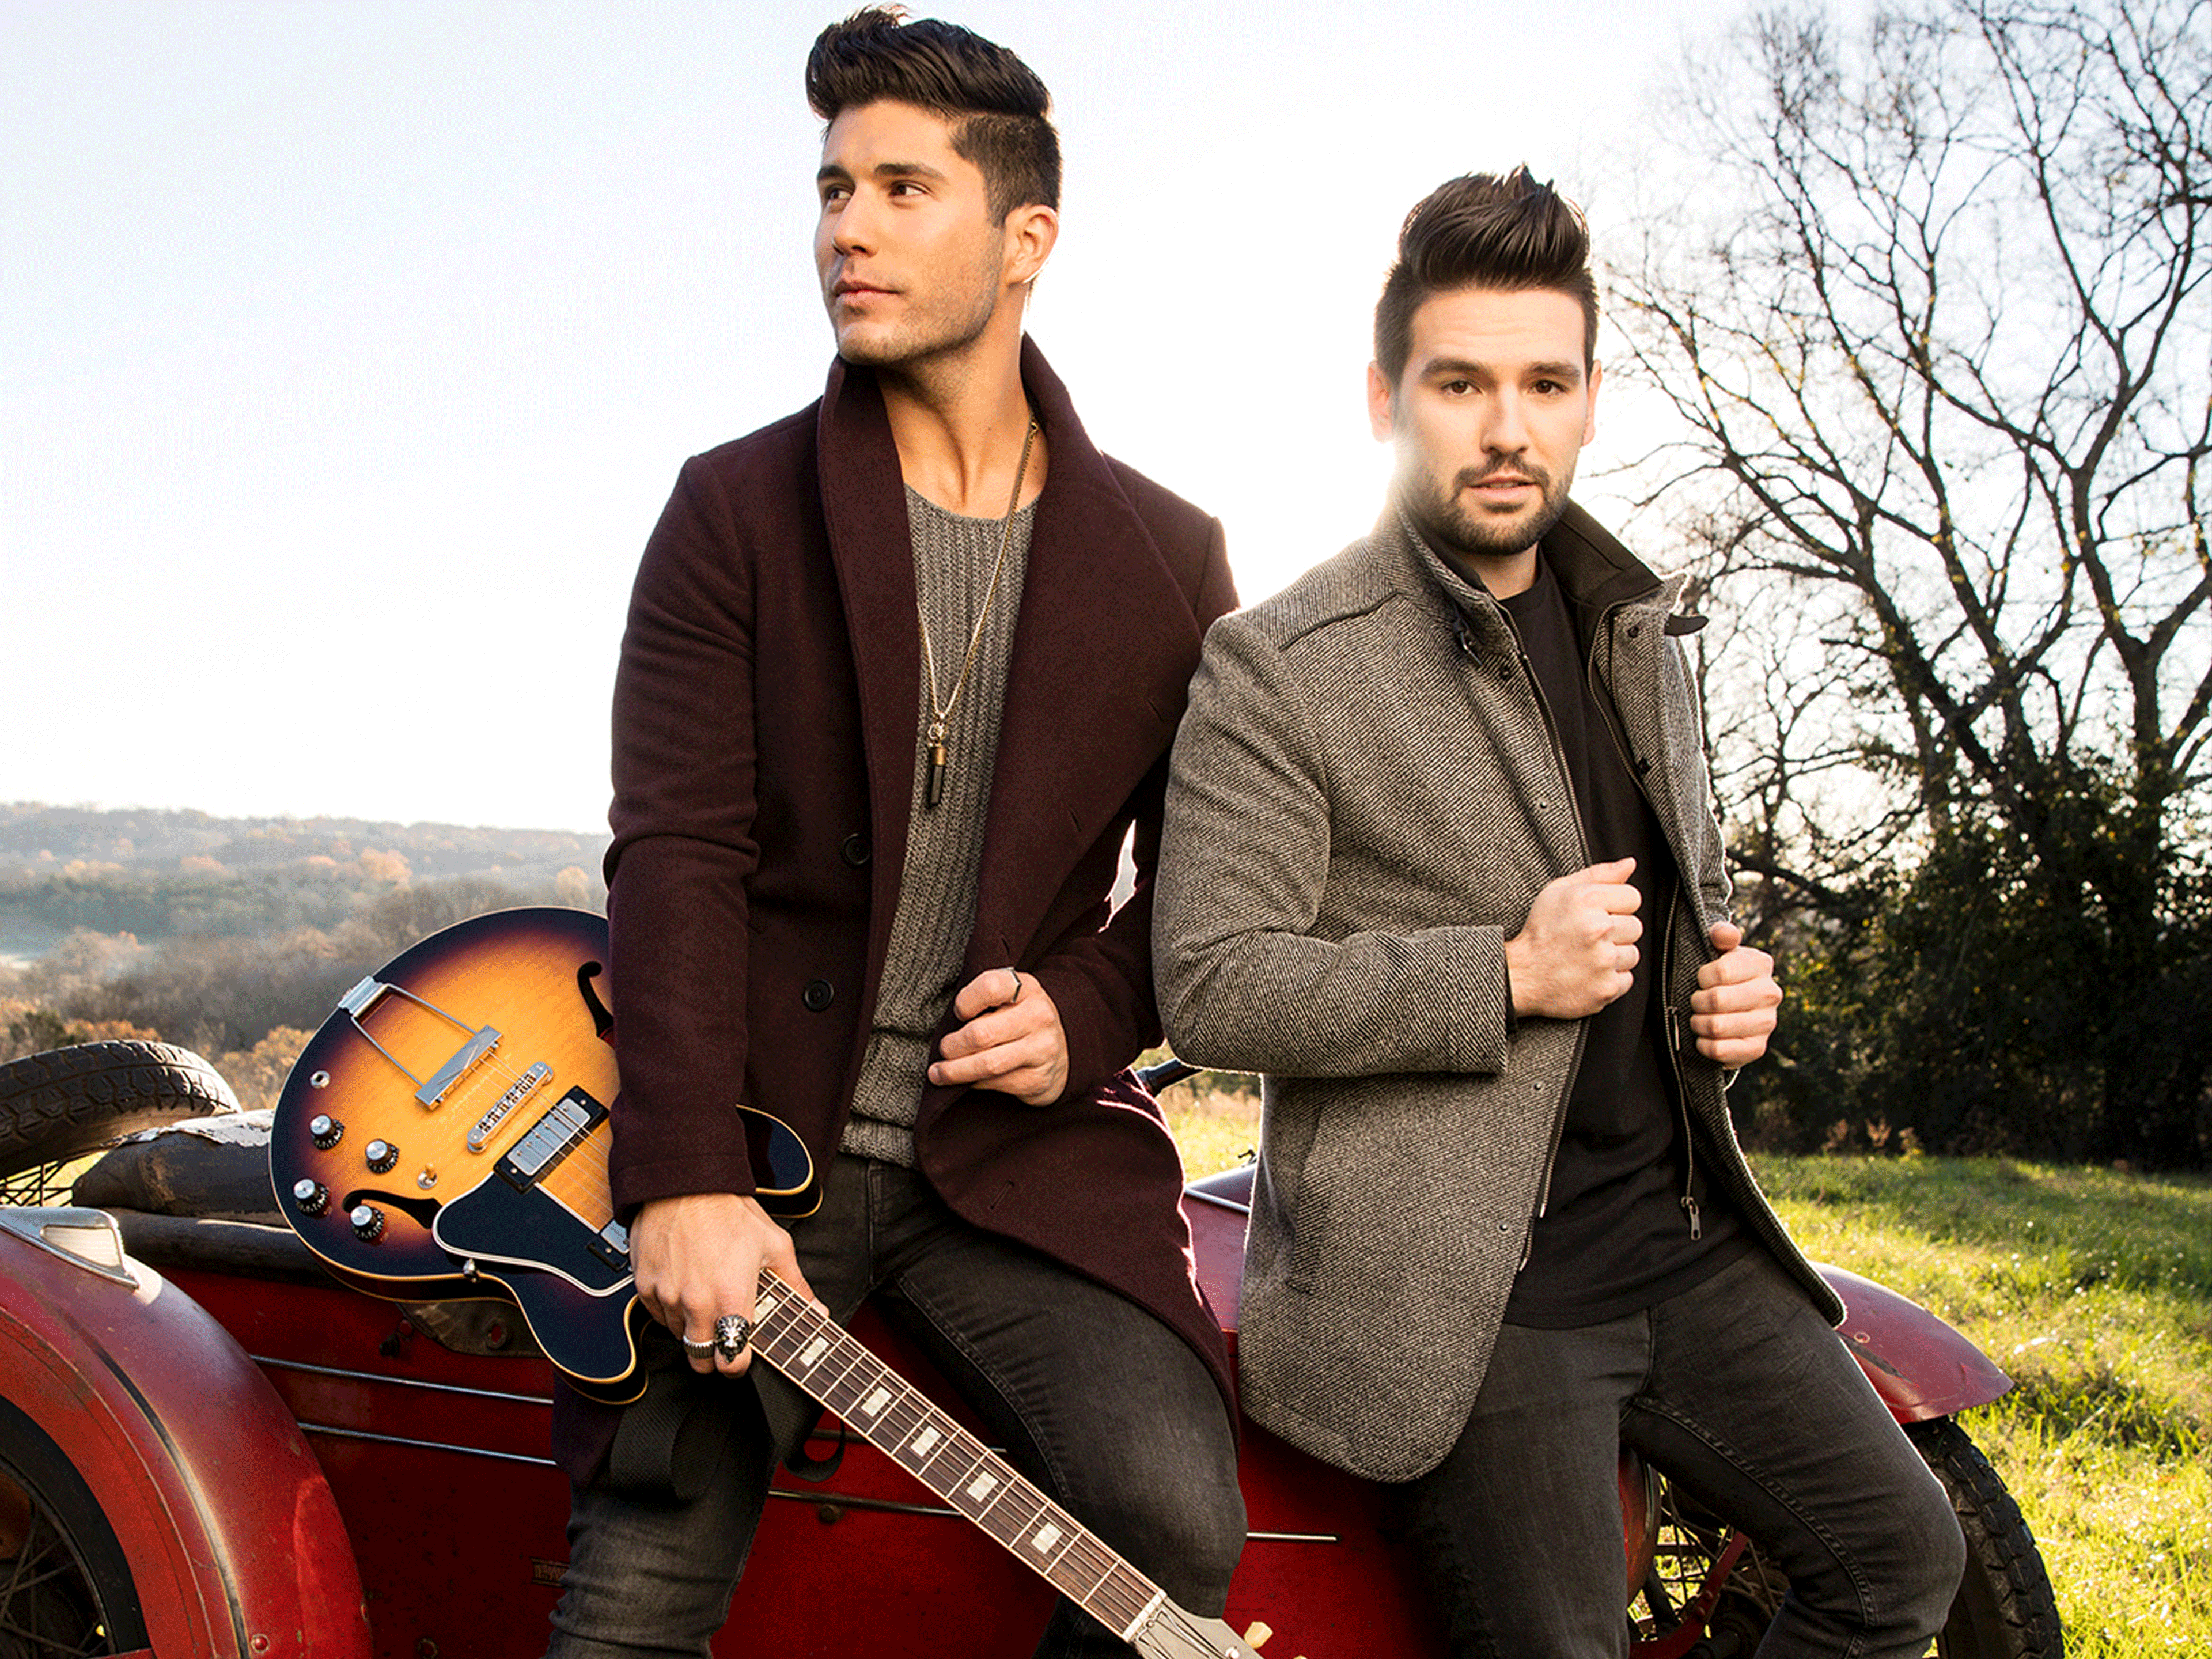 No one knows the Dan + Shay sound better than they know themselves